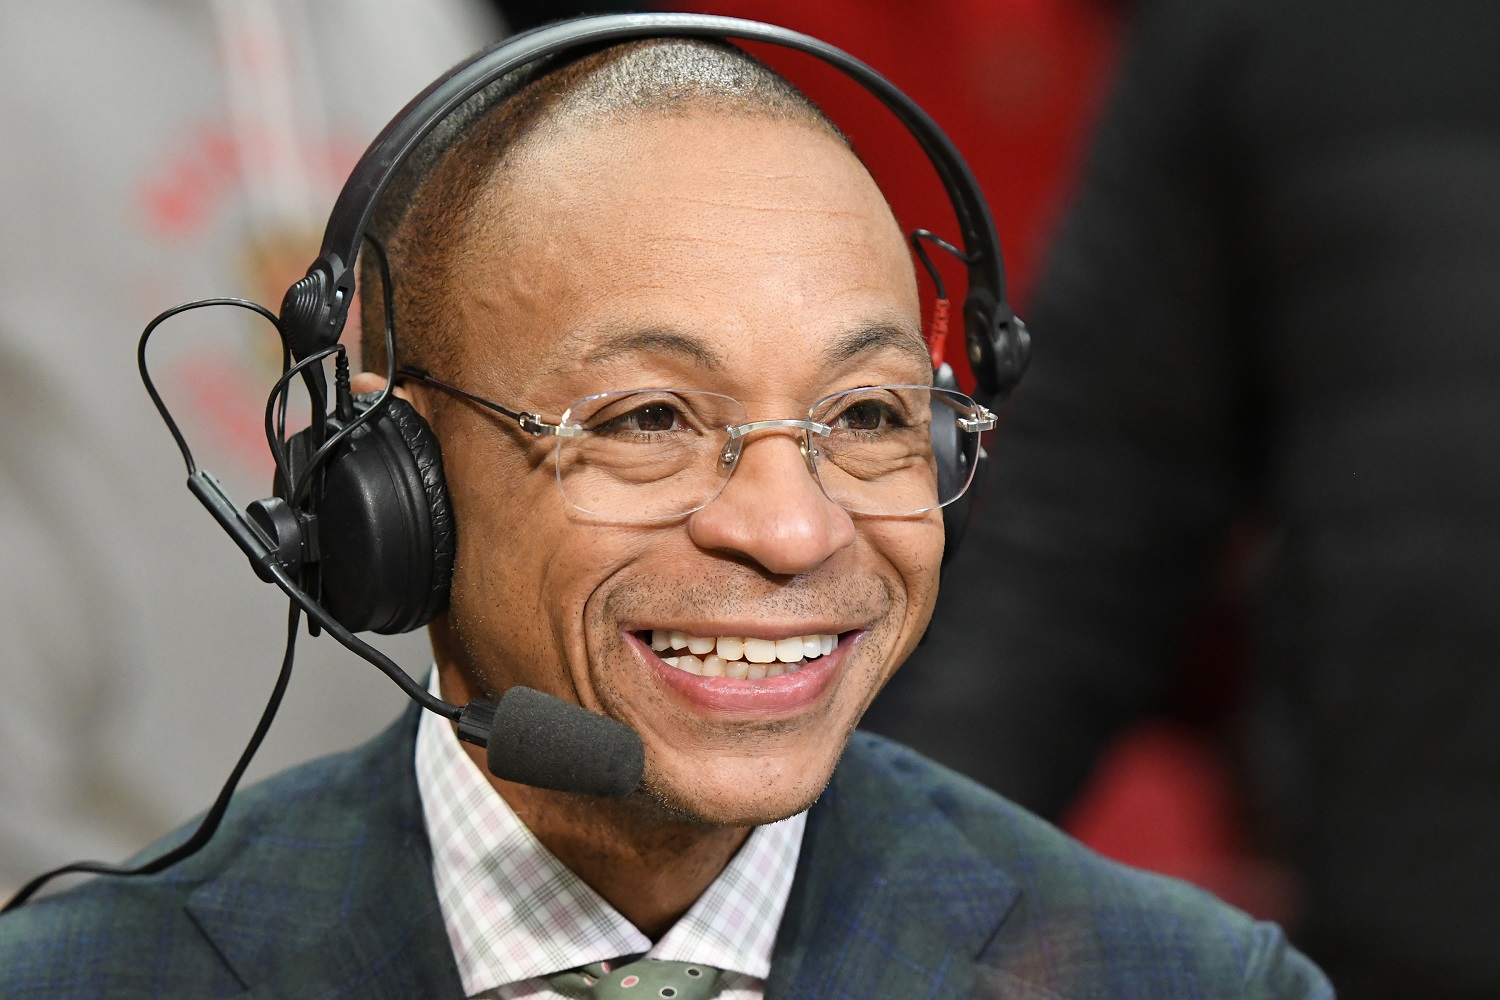 Gus Johnson is known for his enthusiastic game calls in college basketball and football.